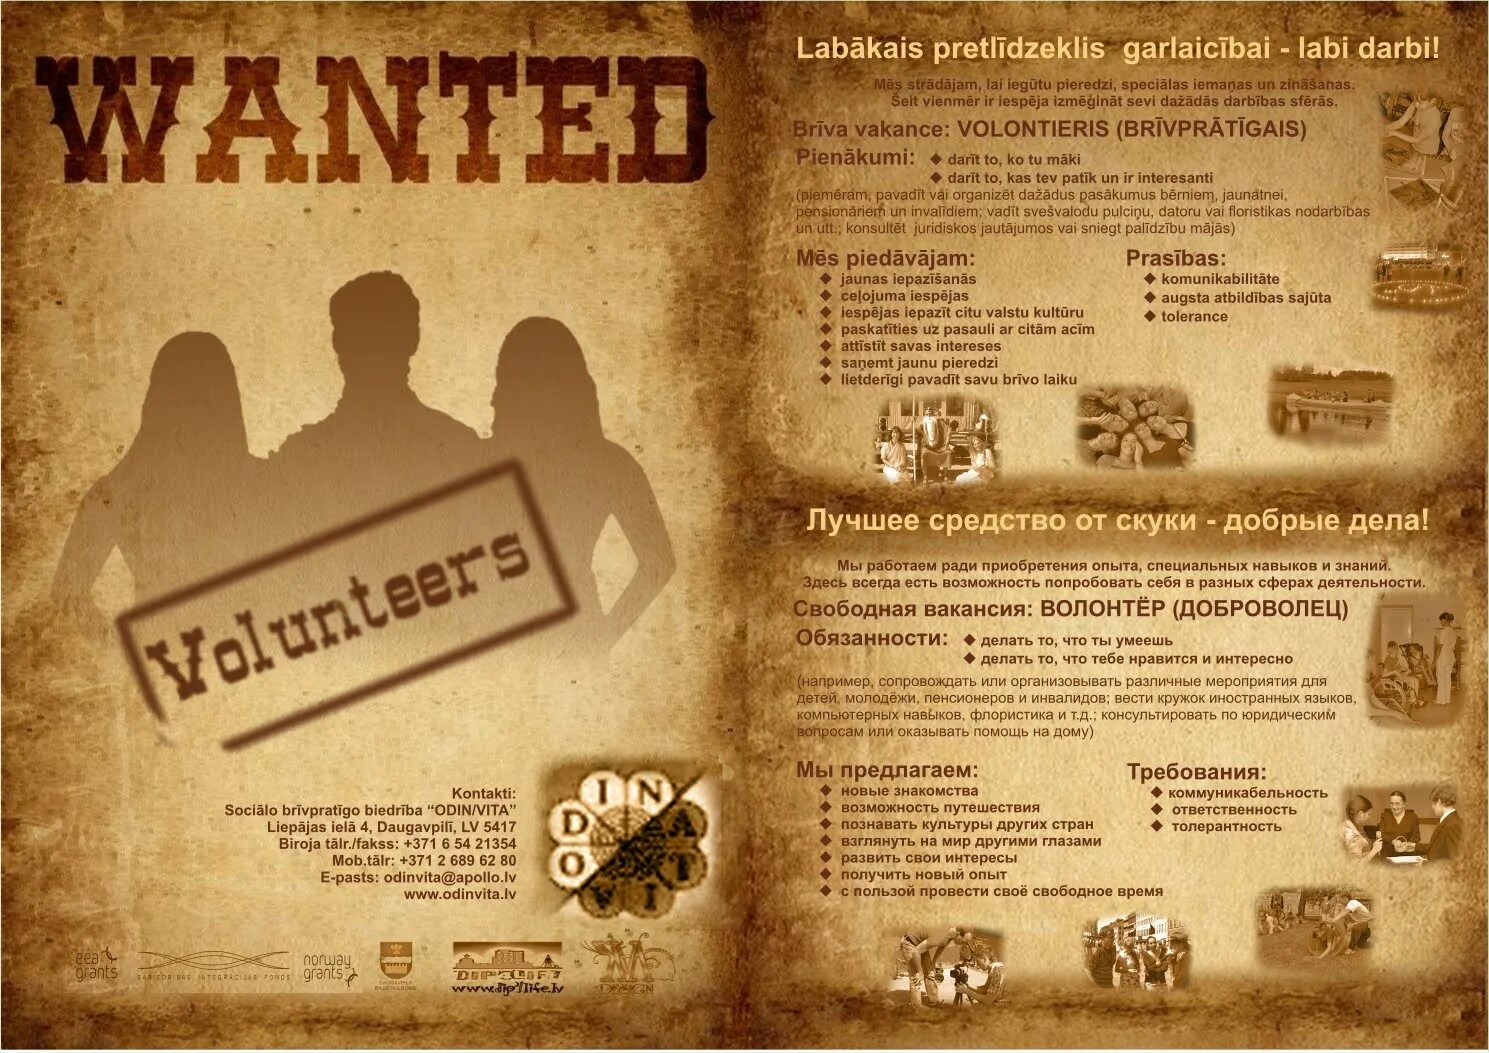 Wanted dangerous. Wanted объявление. Wanted картинка. Афиша wanted. Рамка wanted.